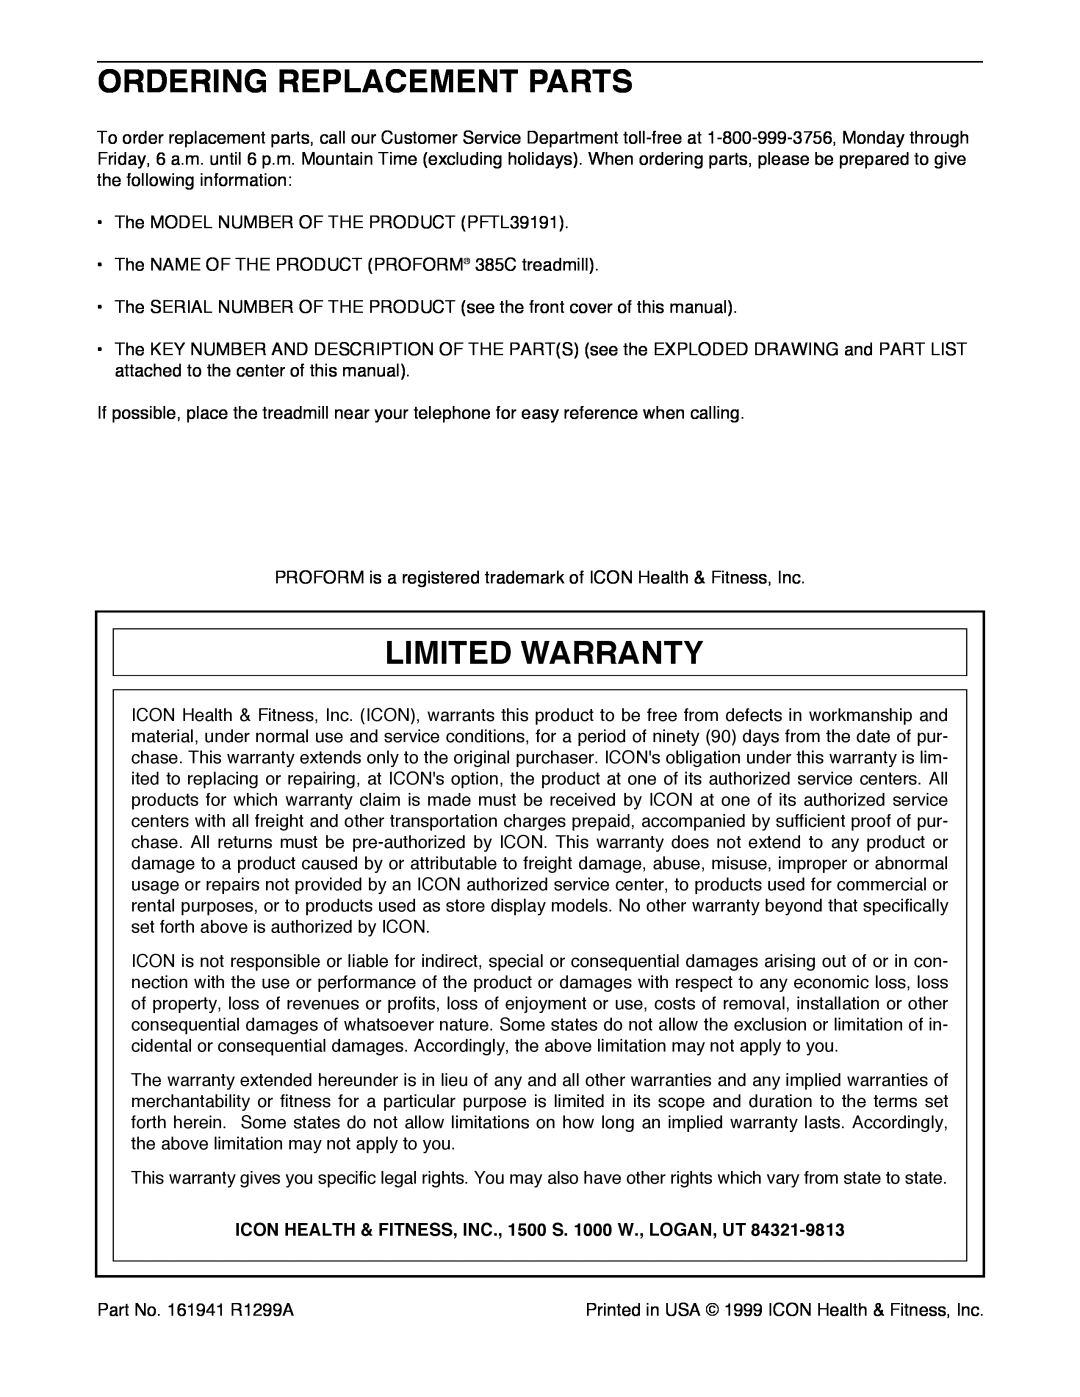 ProForm PFTL39191 Ordering Replacement Parts, Limited Warranty, ICON HEALTH & FITNESS, INC., 1500 S. 1000 W., LOGAN, UT 